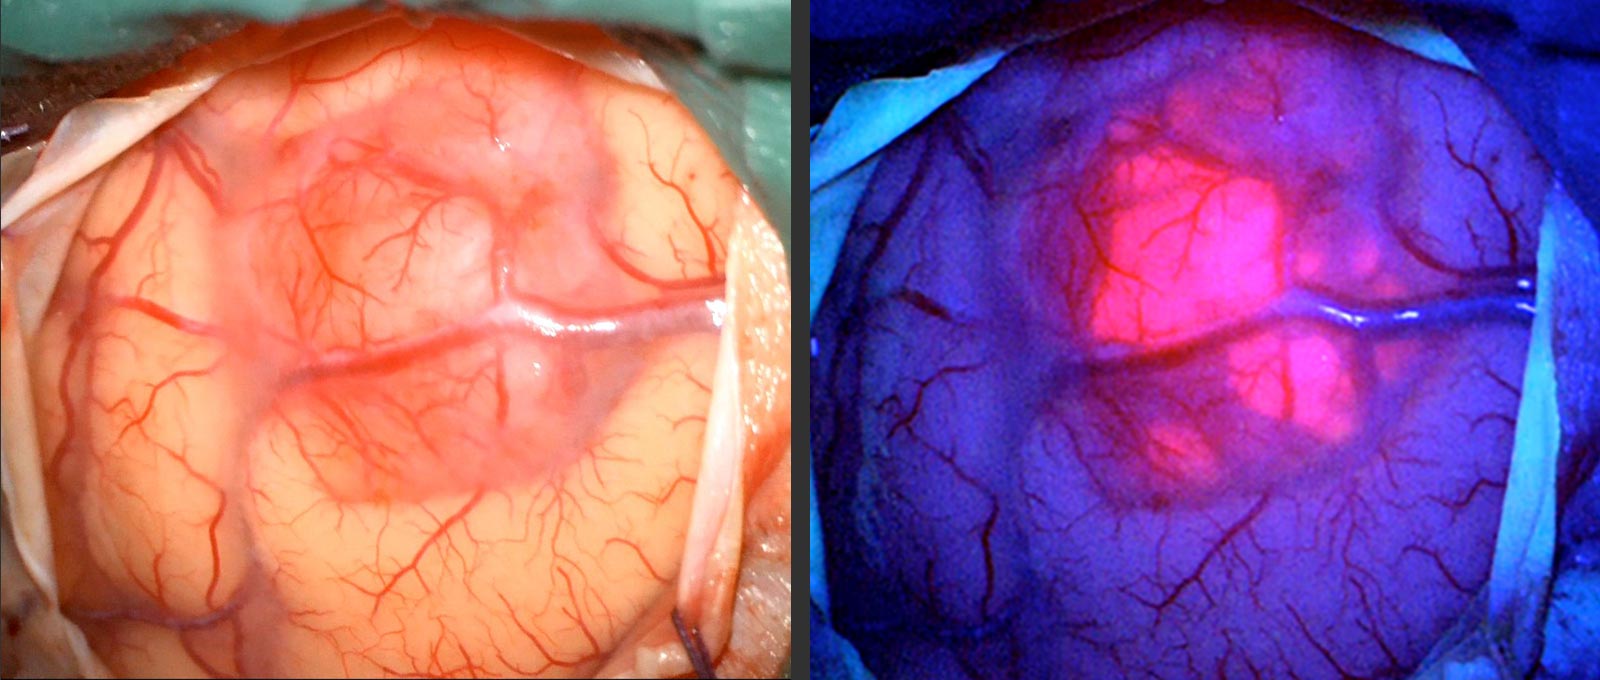 2 photos of a tumor in comparison. On the left under normal lighting and on the right under special blue light with red and pink discolored tumor tissue